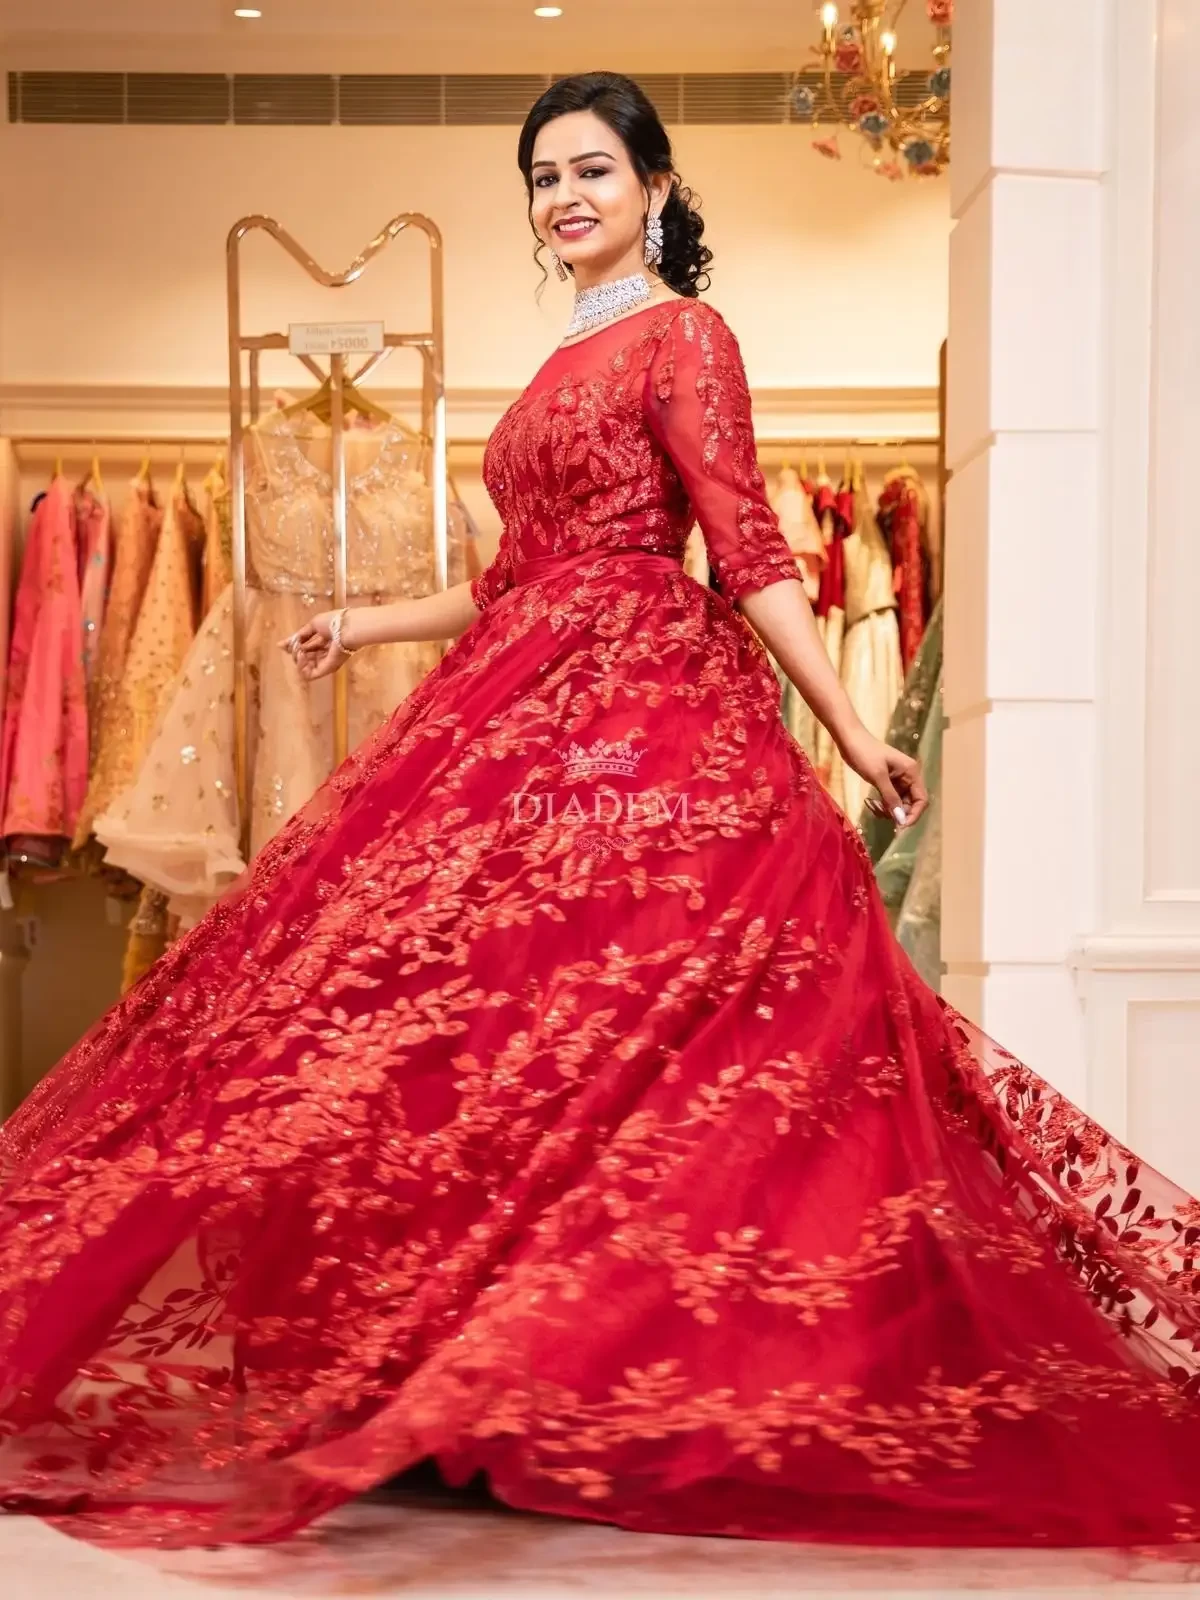 Red Ball Gown Embellished With Floral Laces And Beads